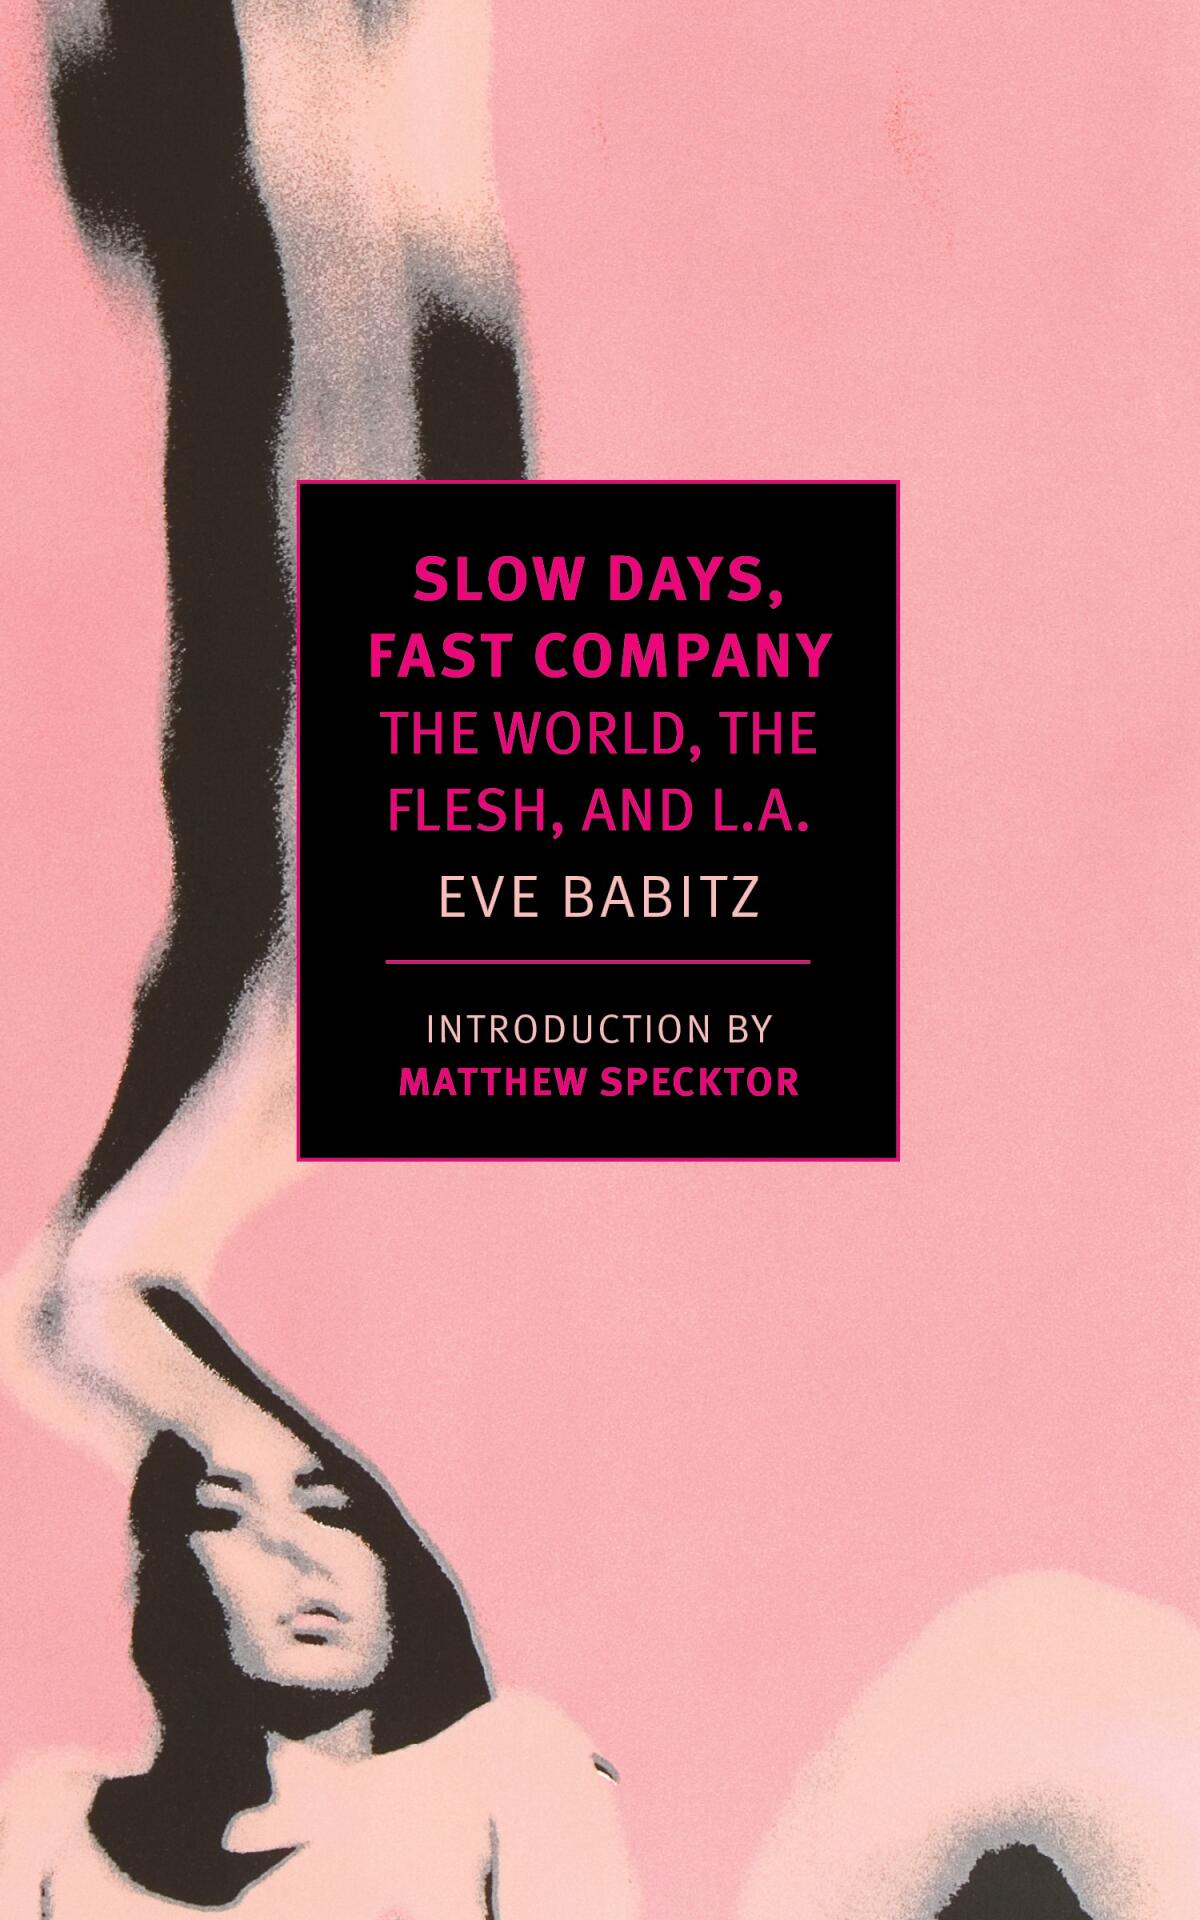 "Slow Days, Fast Company, The World, The Flesh, and L.A." by Eve Babitz